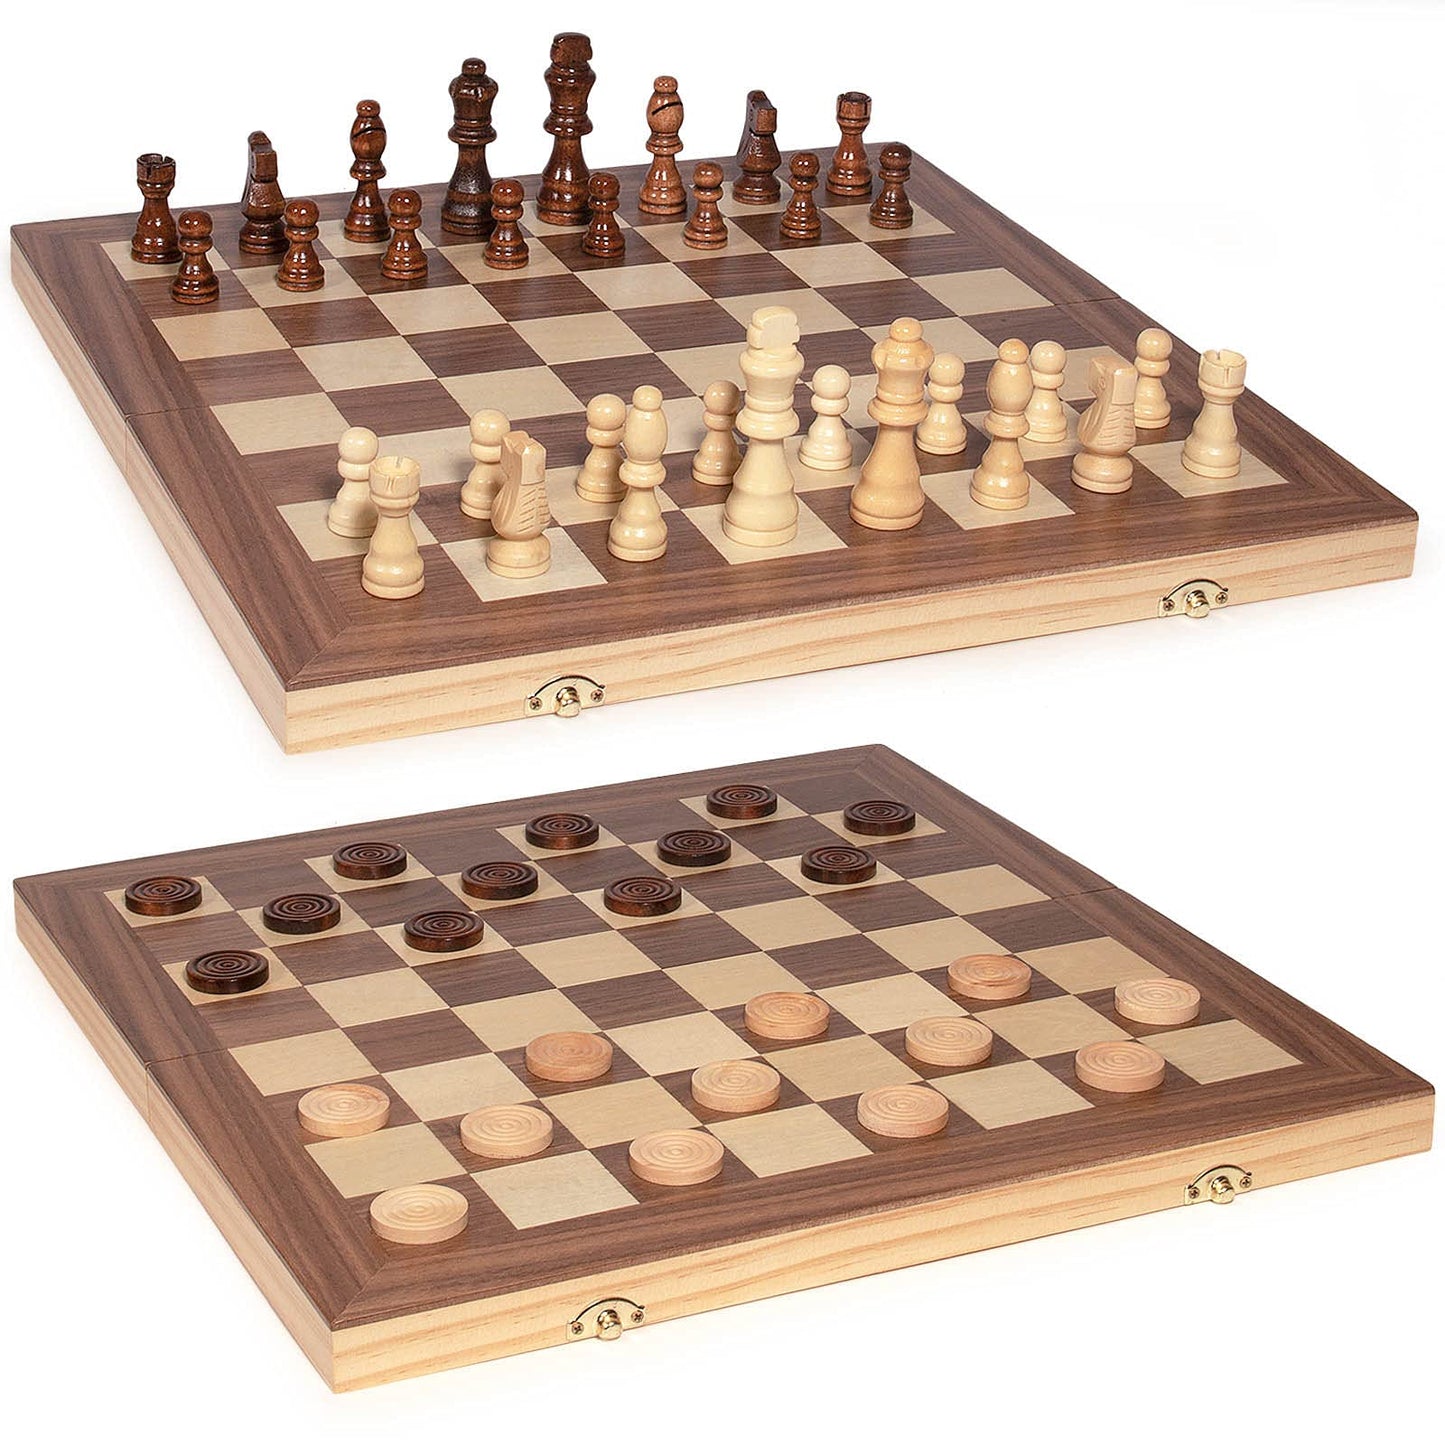 AMEROUS 15'' Wooden Chess & Checkers Set, 2 in 1 Board Games -2 Extra Queens -24 Cherkers Pieces - Gift Box Packed - Chessmen Storage Slots, Beginner Chess Set for Kids and Adults